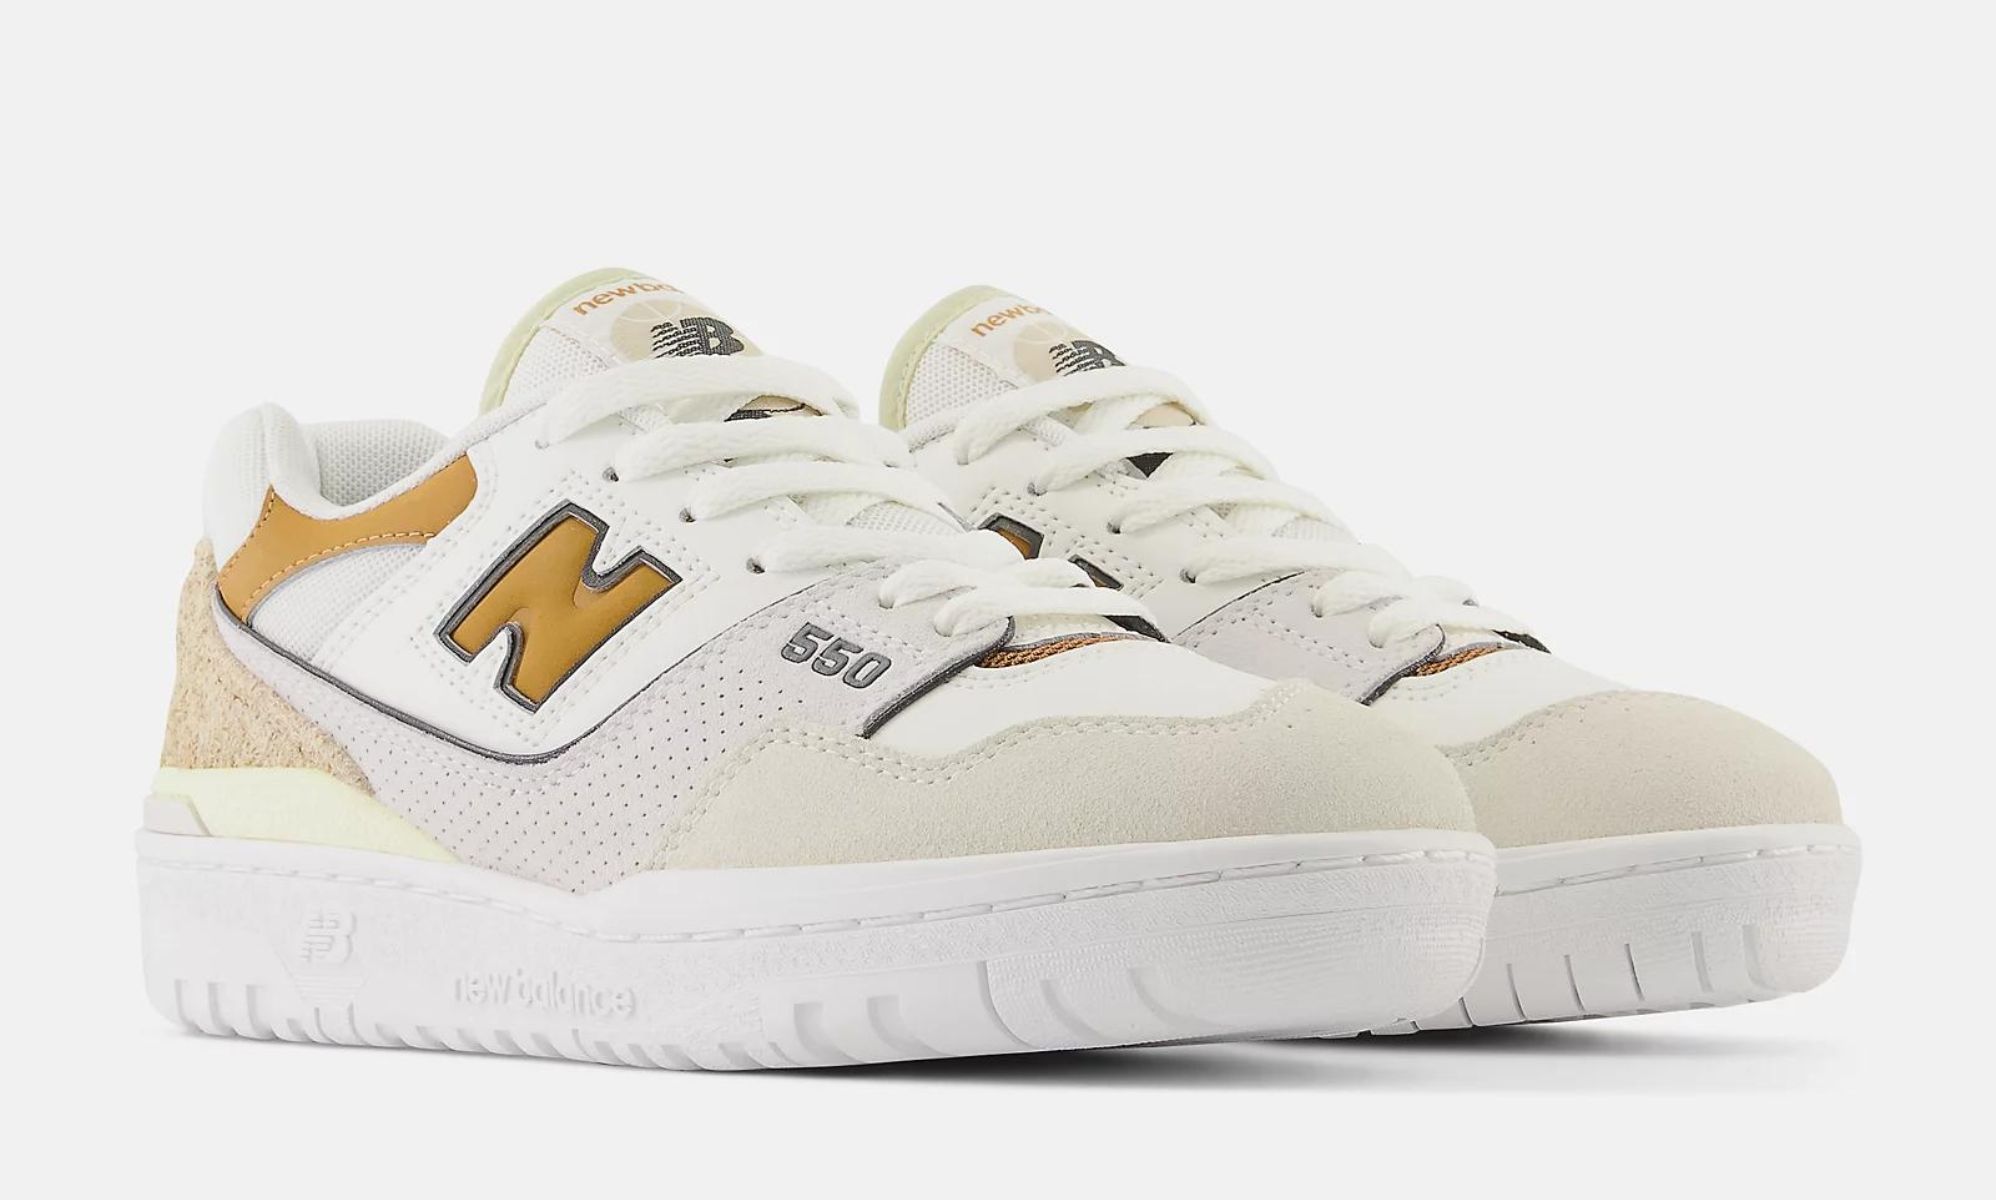 New Balance Black Friday 2023: When does the sale start?